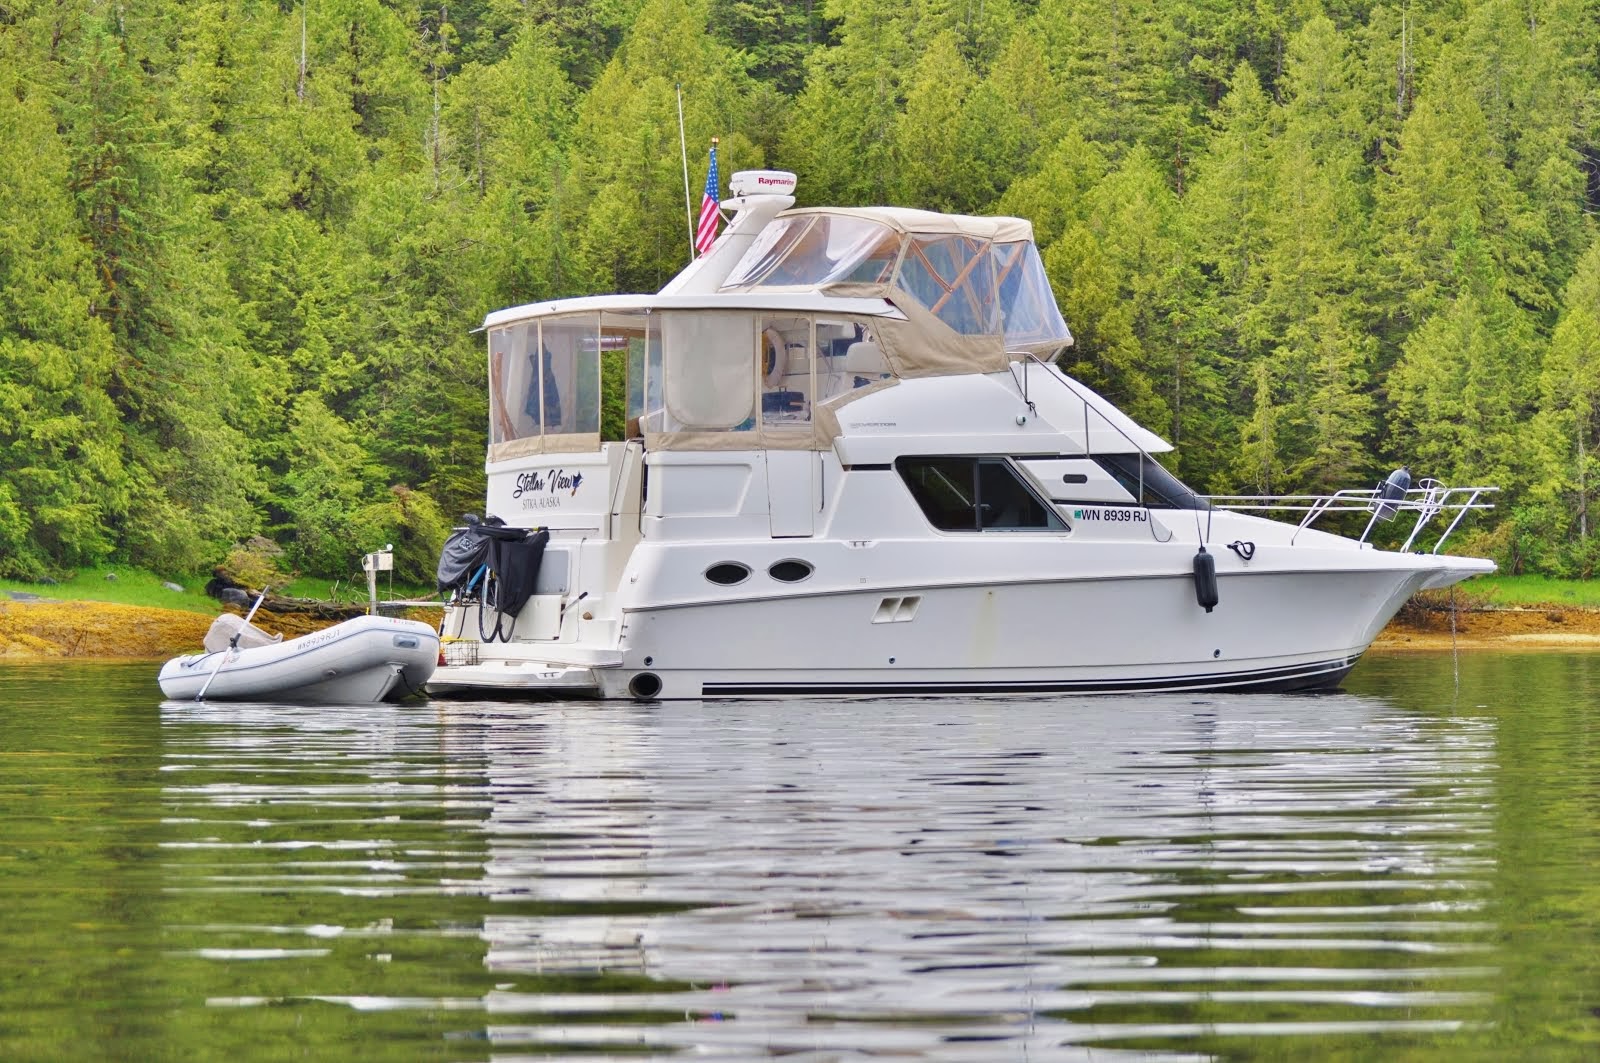 Our 43' Silverton motor boat